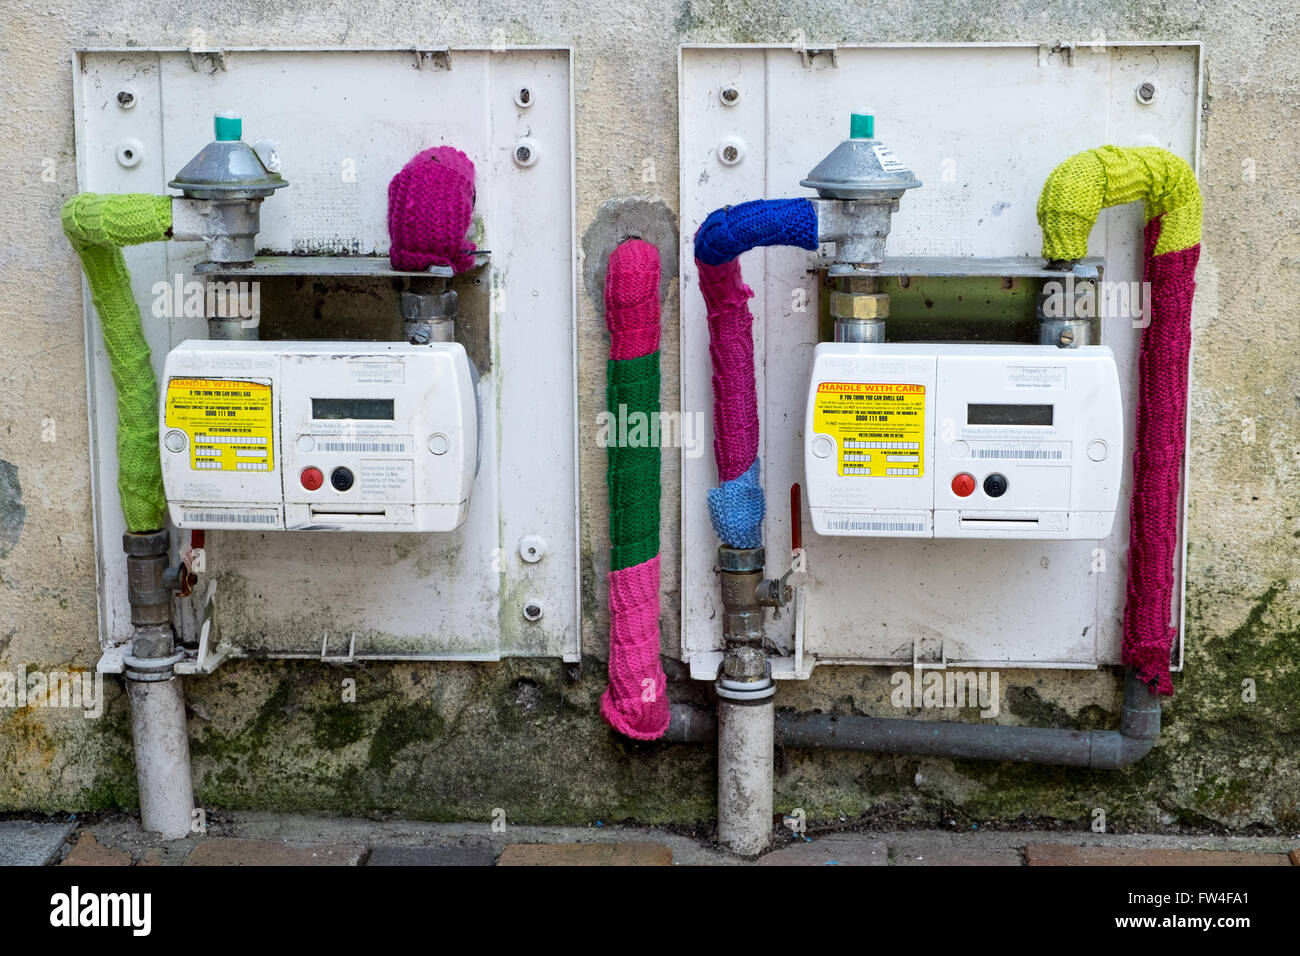 Yarn Bombing knitting graffiti in Bideford Devon, UK. Knitting has appeared covering gas meters in the town Stock Photo